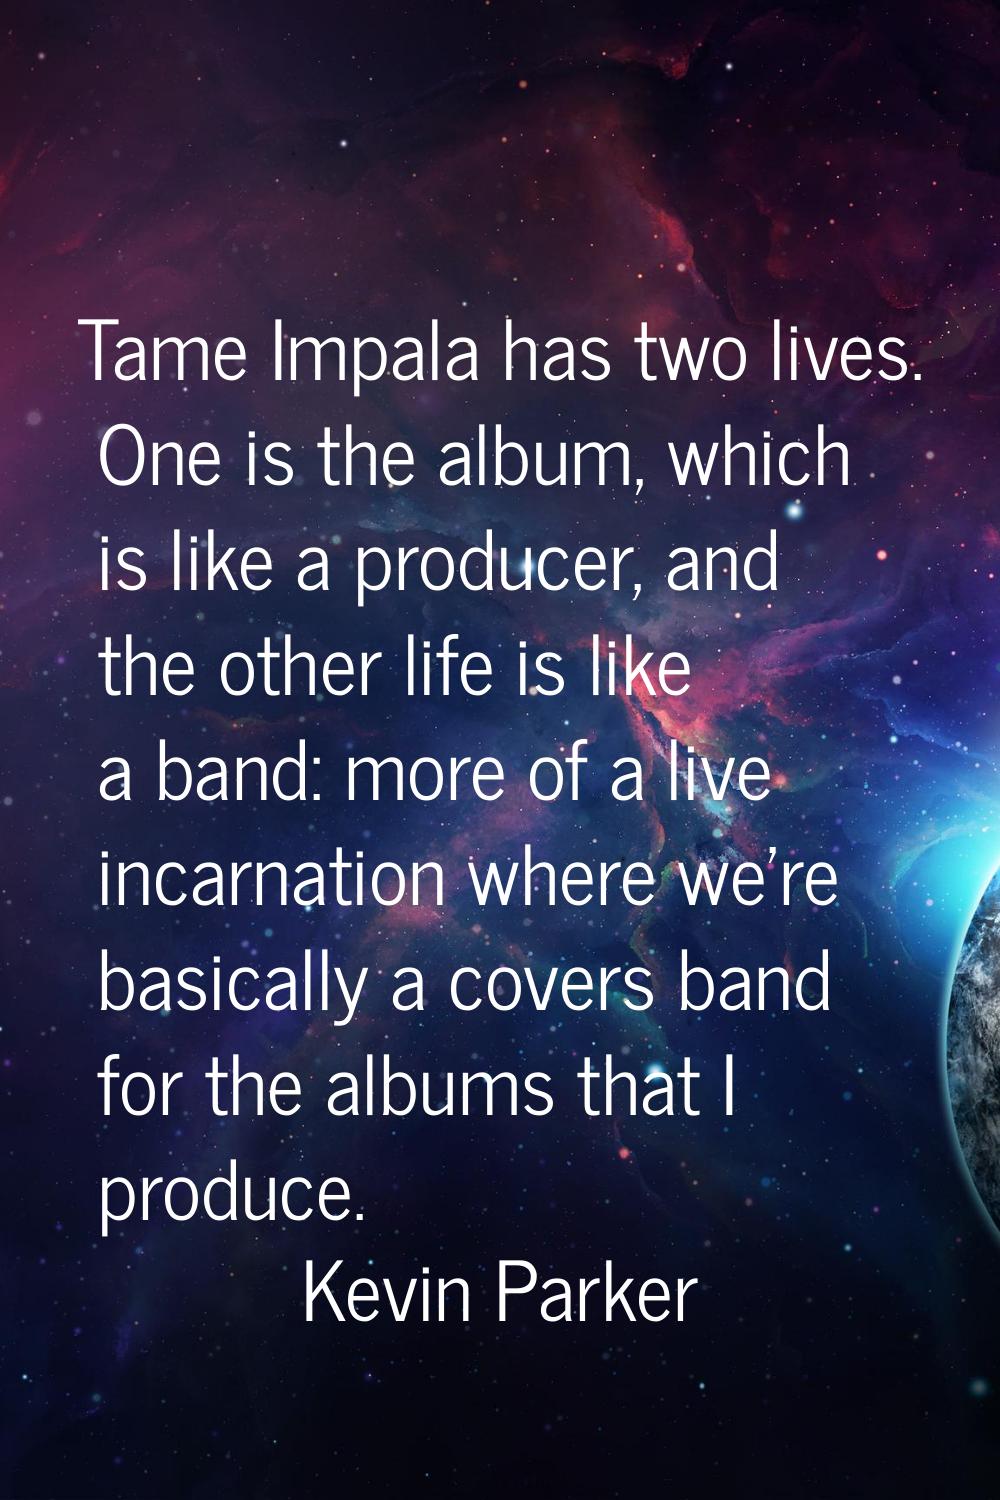 Tame Impala has two lives. One is the album, which is like a producer, and the other life is like a